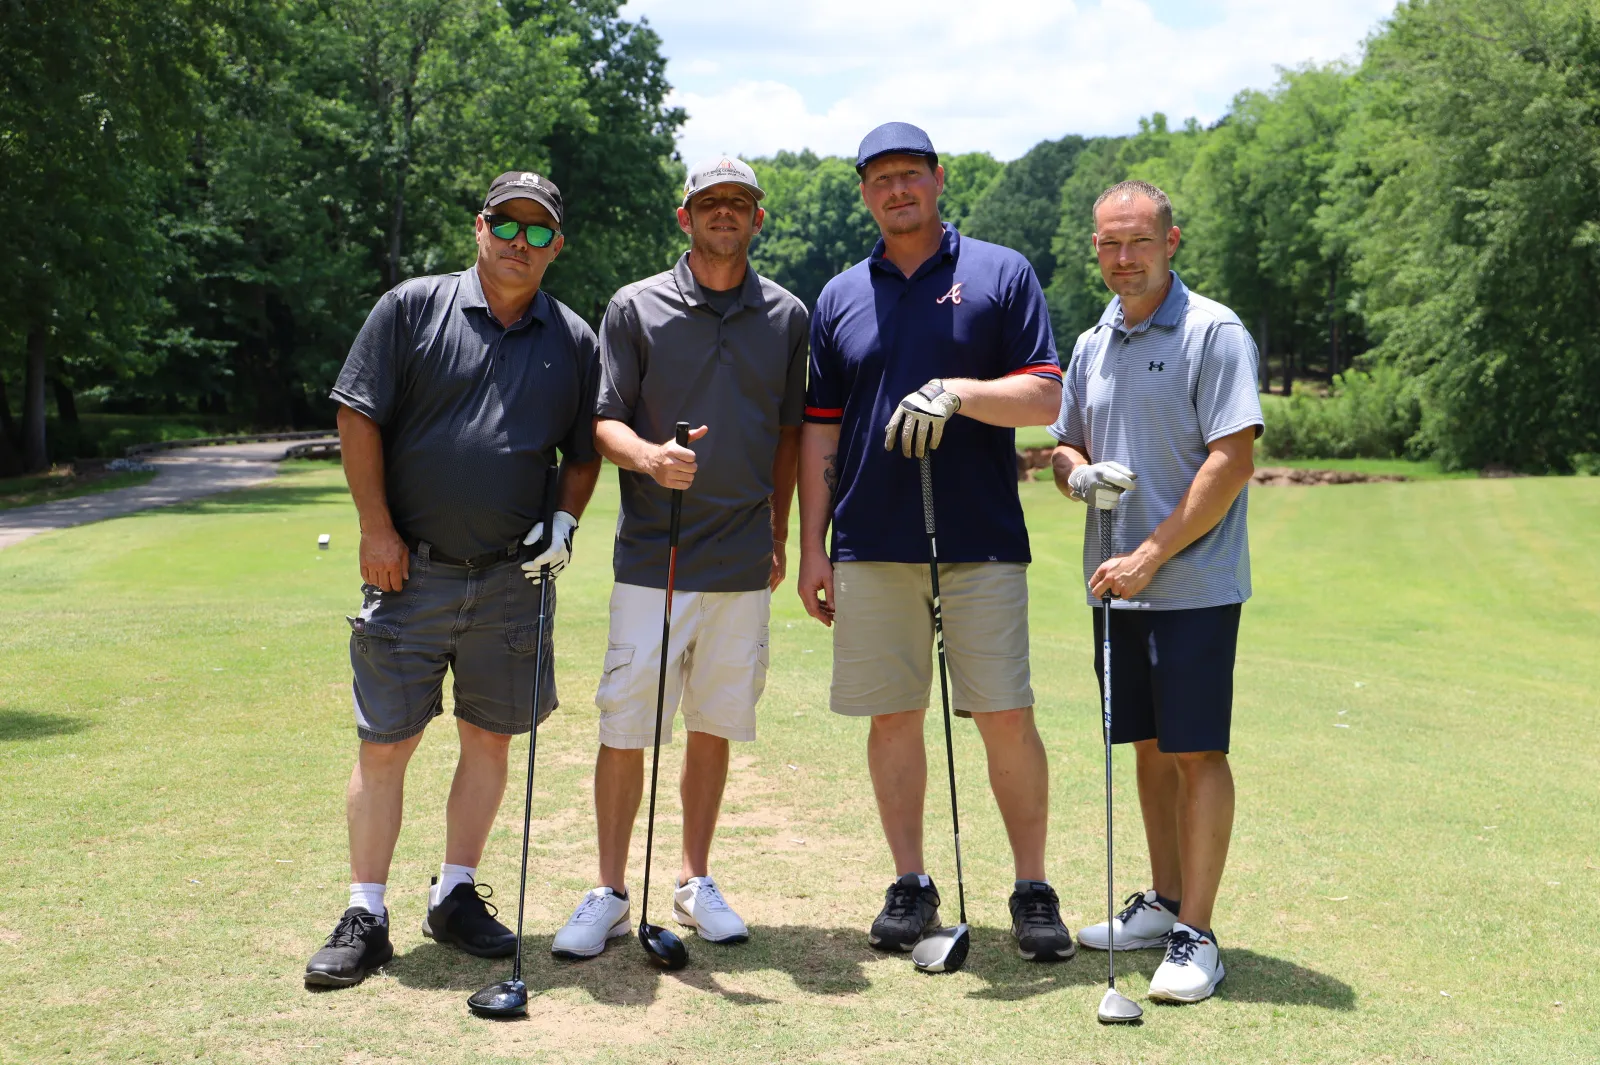 a group of men standing on a golf course